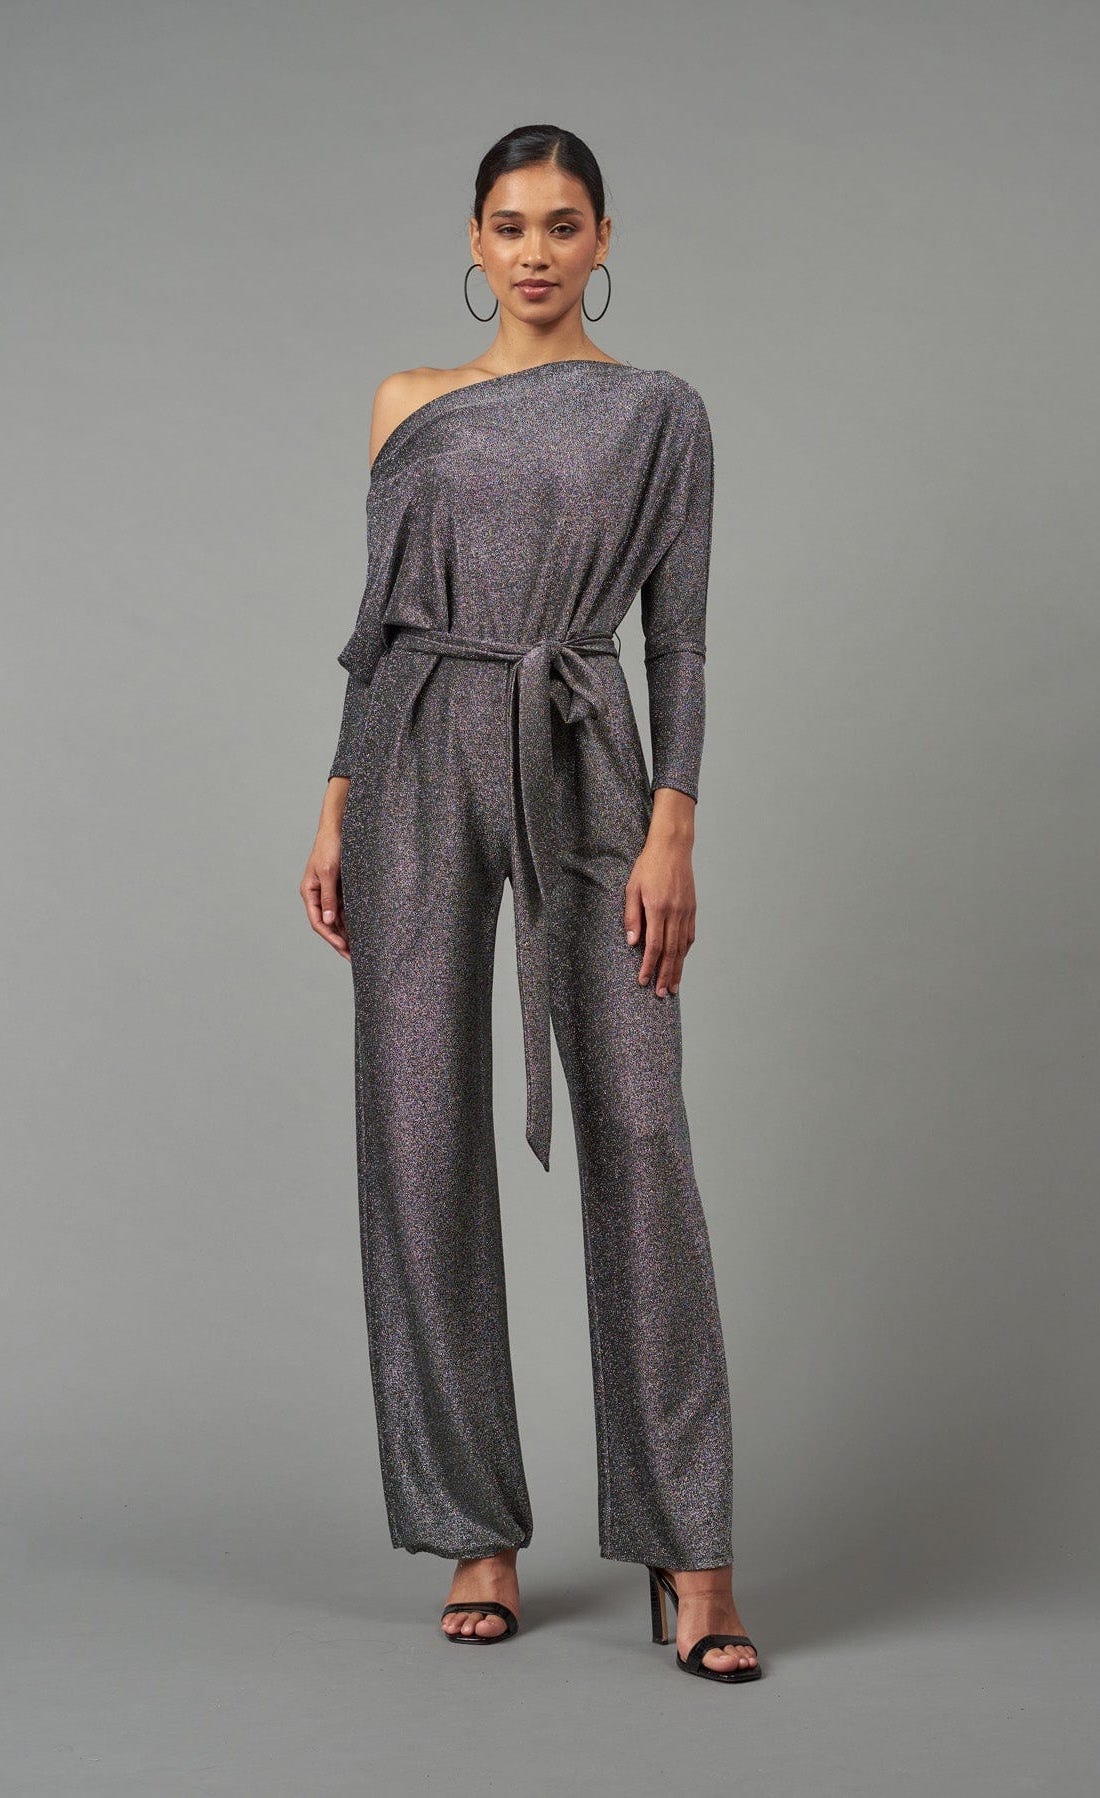 Front full body view of the lola & sophie lurex jersey jumpsuit. This jumpsuit is silver colored with long sleeves, long wide pants, a tie belt at the waist, and a boat neck being worn off the shoulder.